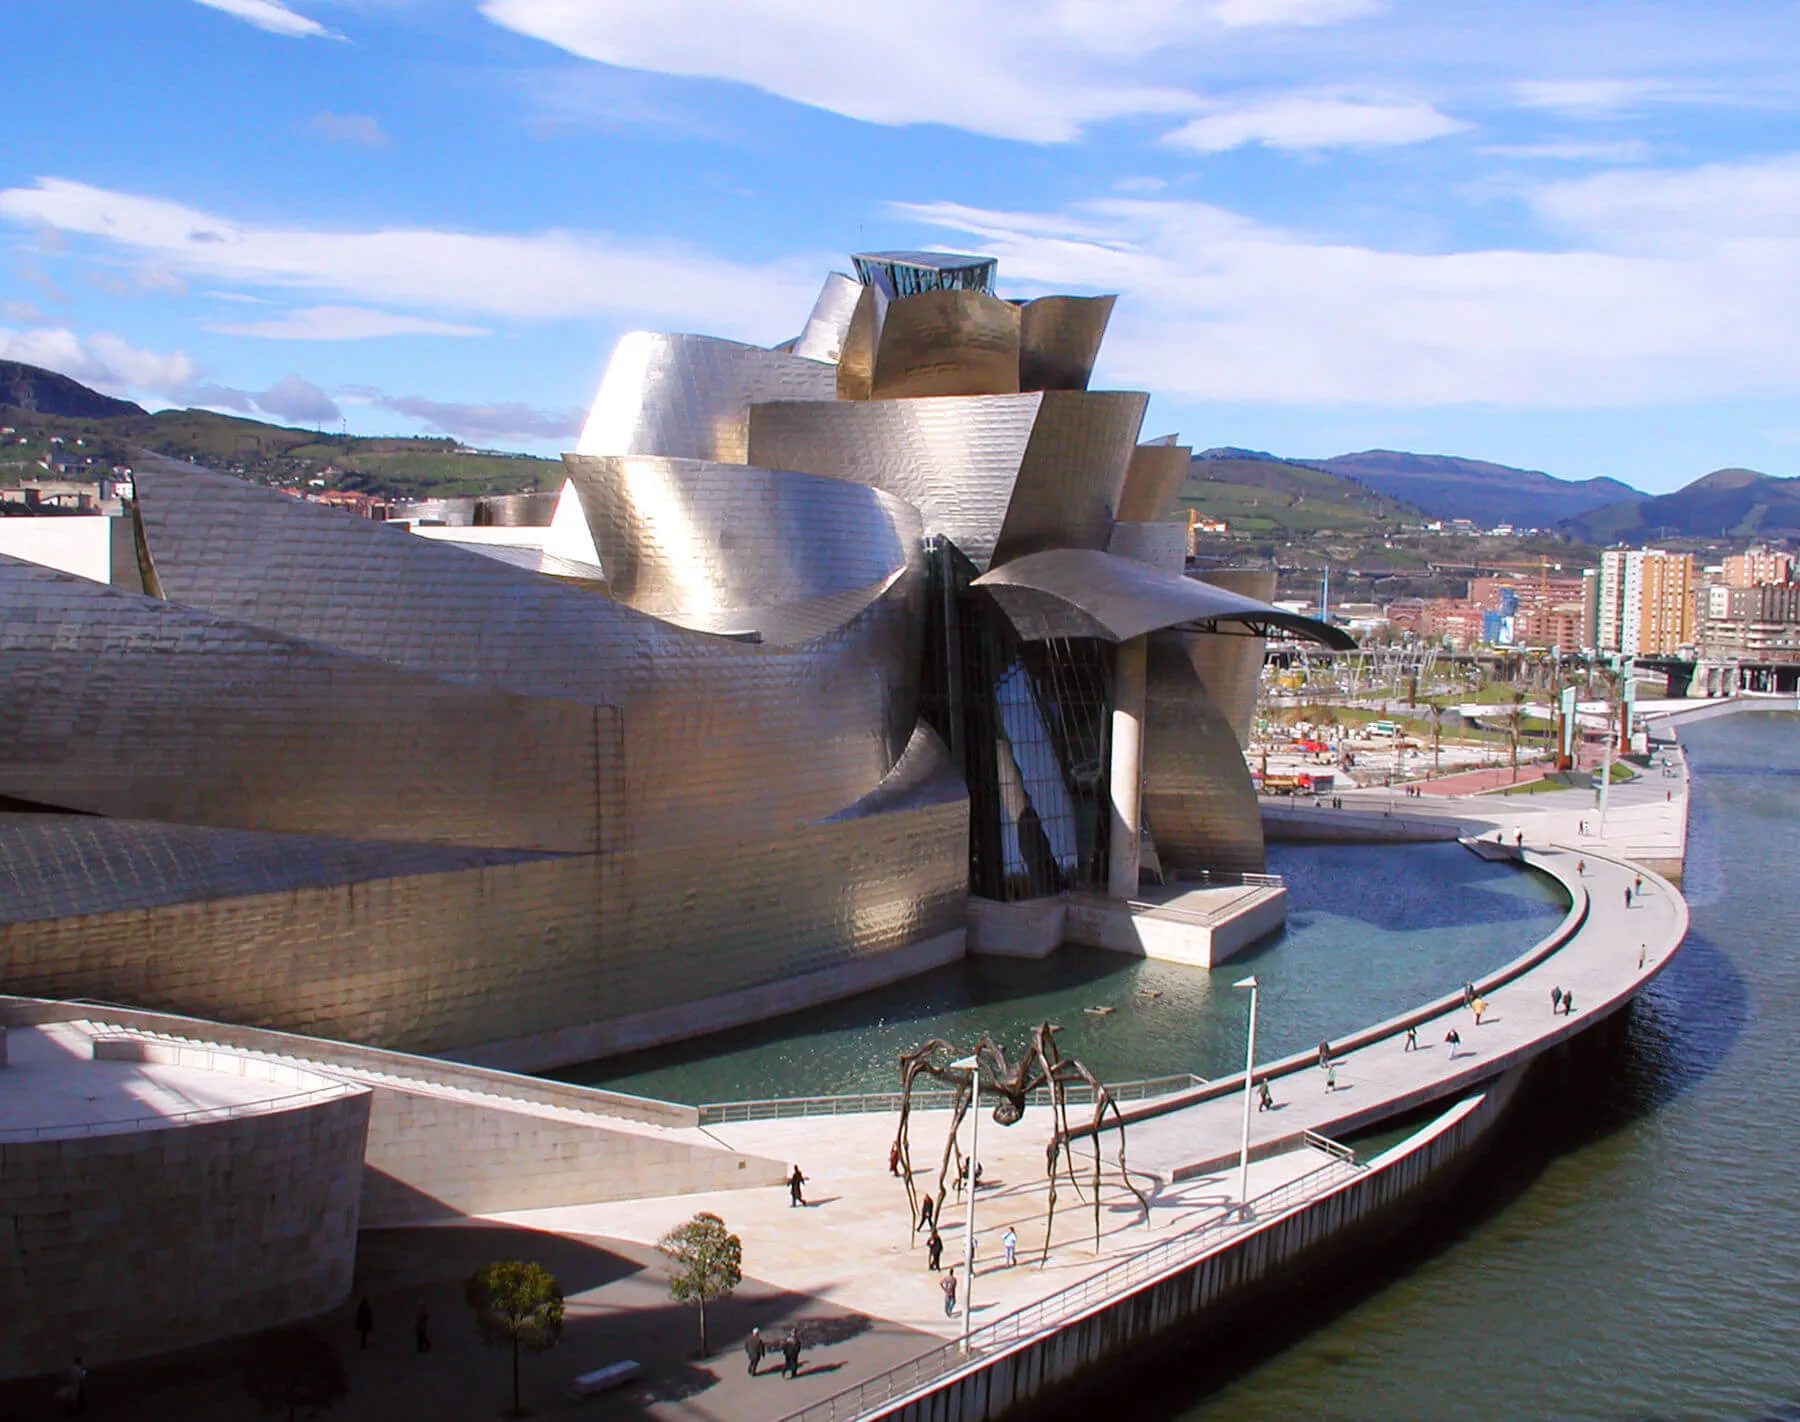 The striking architecture of the Guggenheim Bilbao art museum has put the Basque city of Bilbao on the map